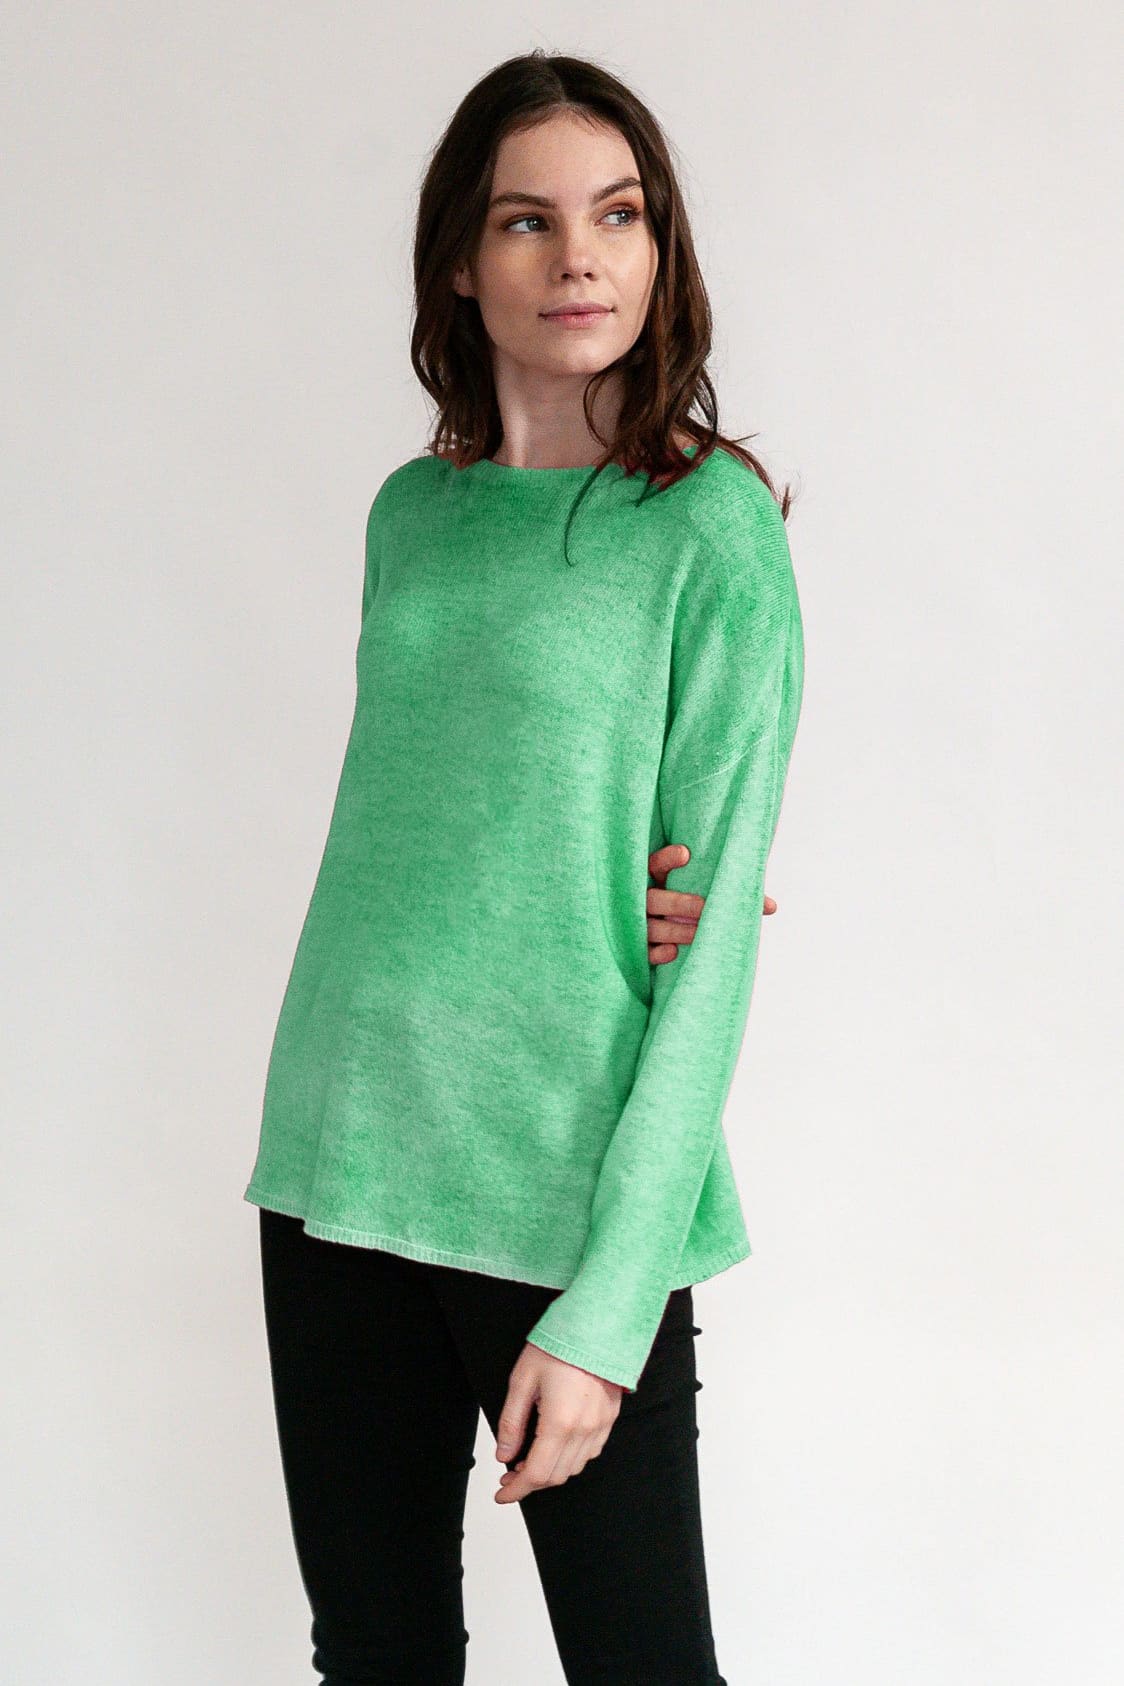 Dalby Cashmere - Jade - Sweaters